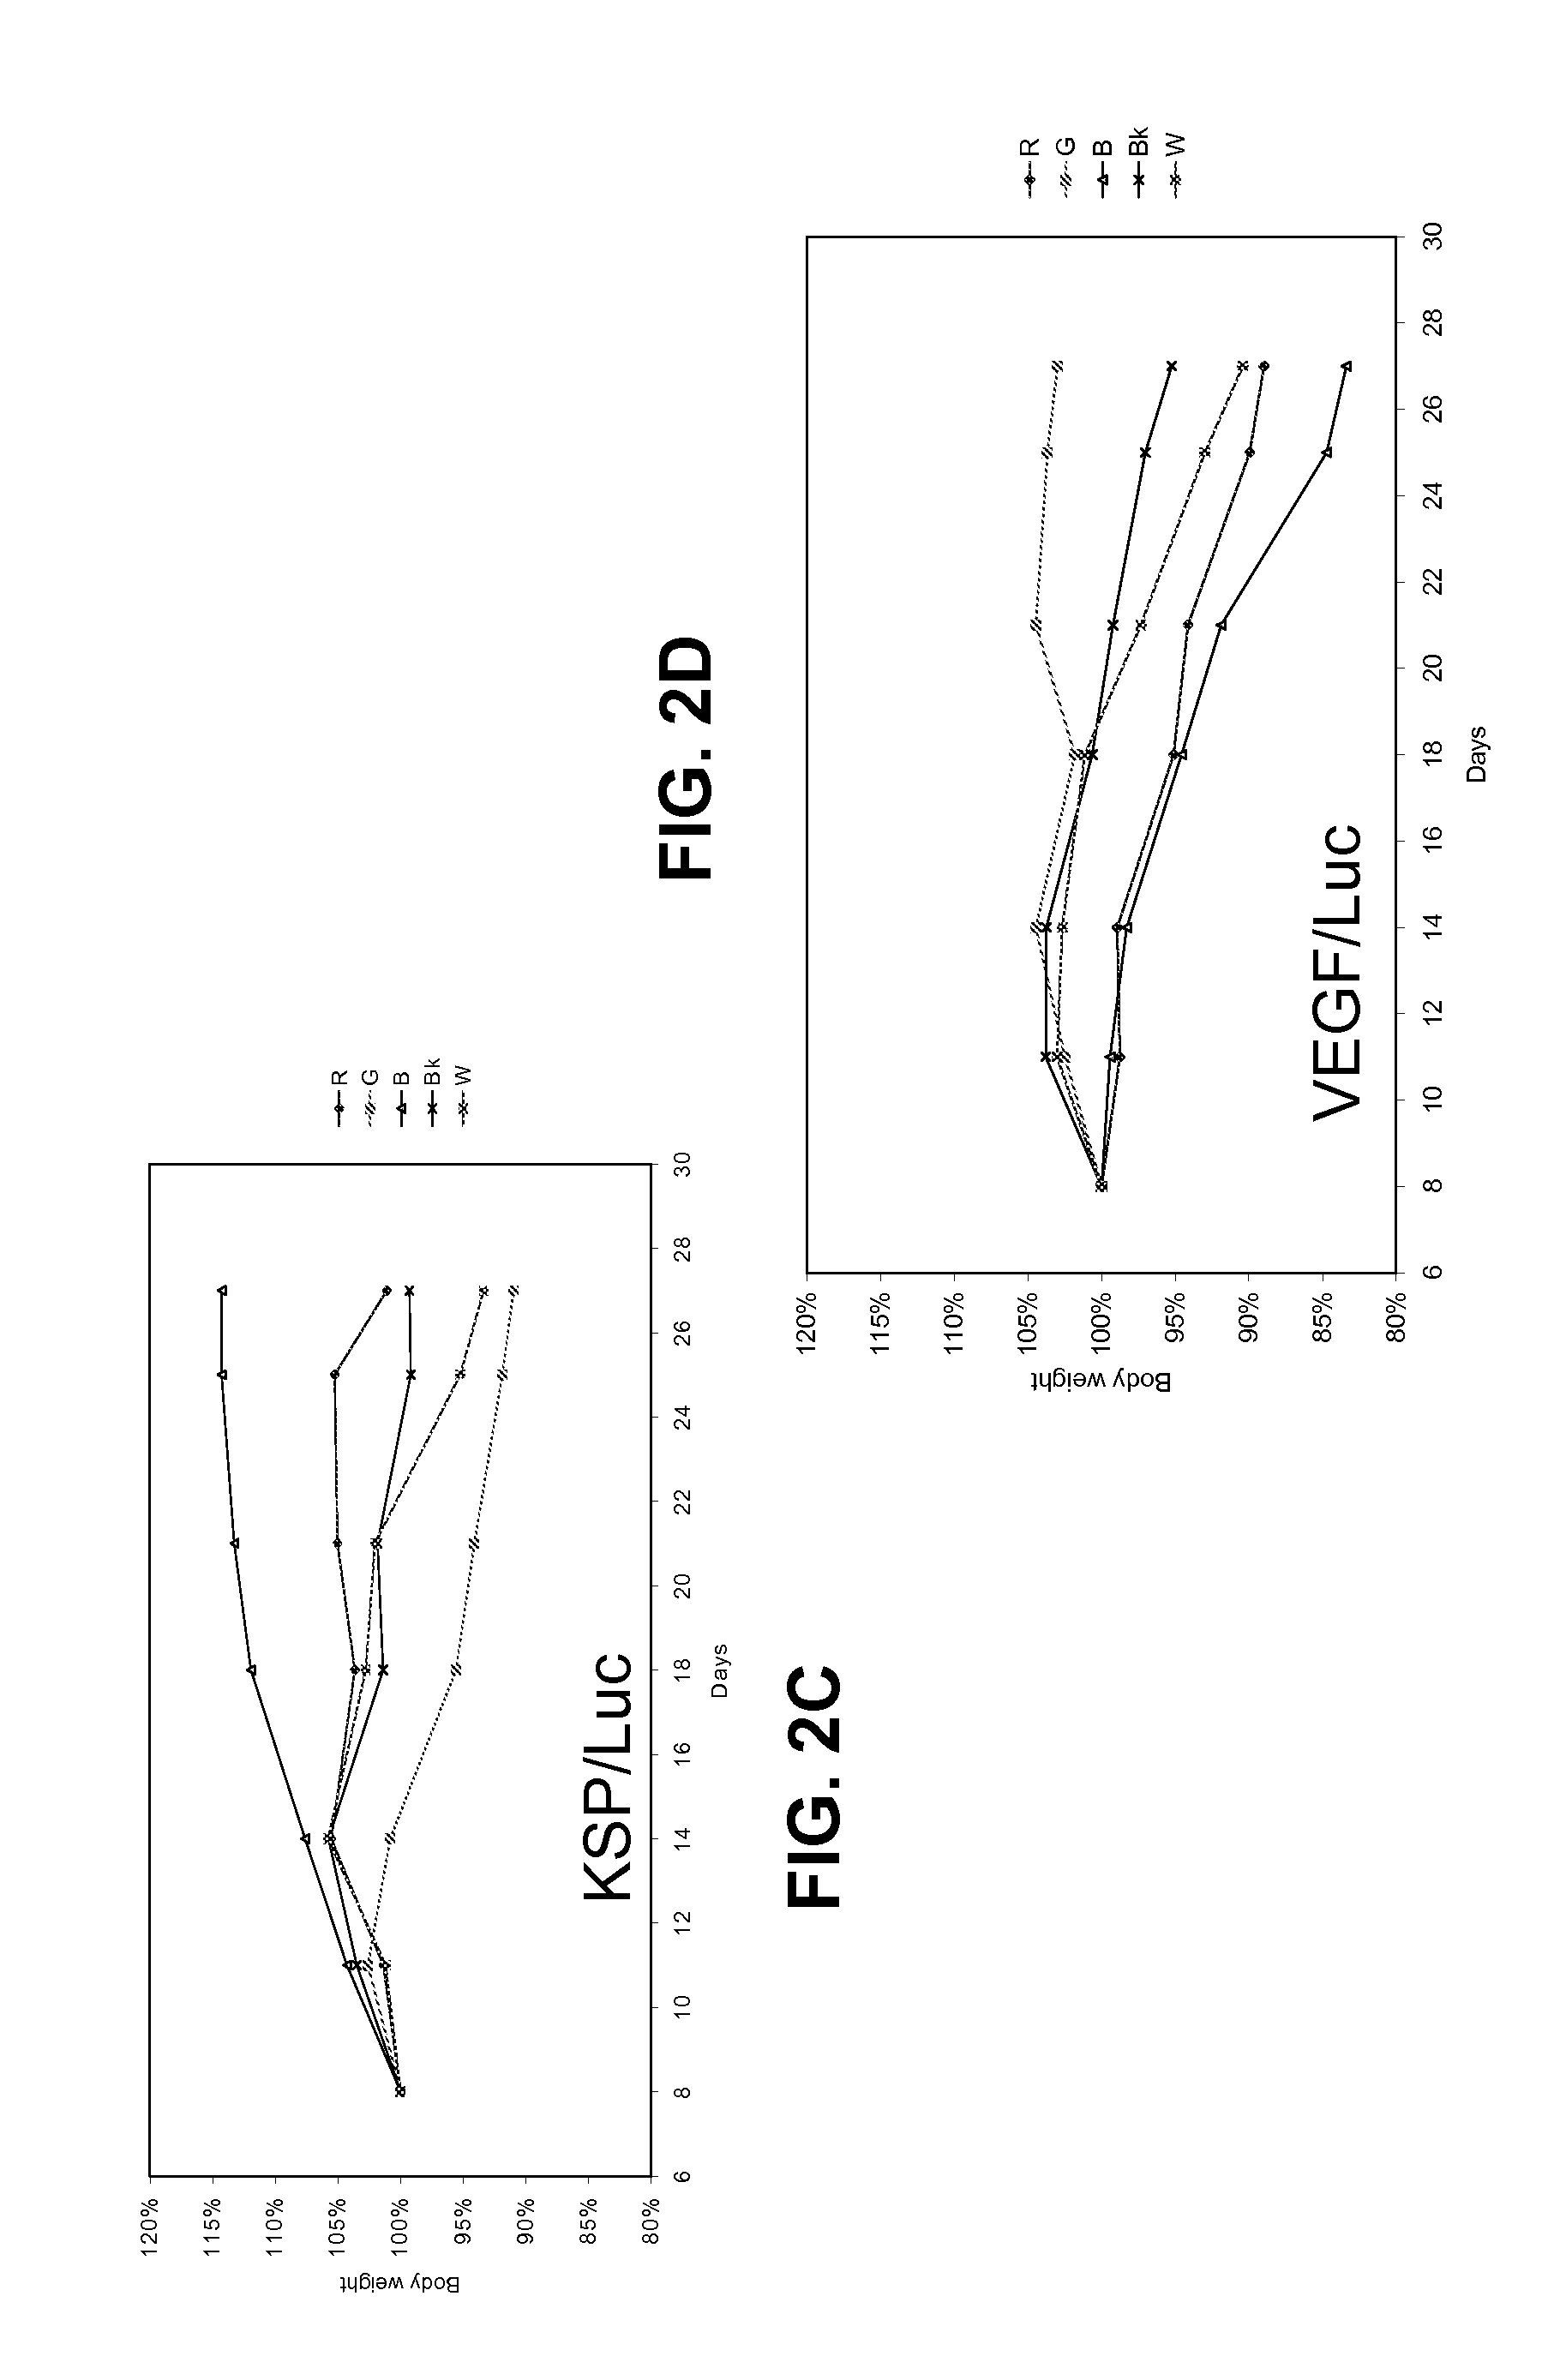 Lipid formulated compositions and methods for inhibiting expression of eg5 and VEGF genes